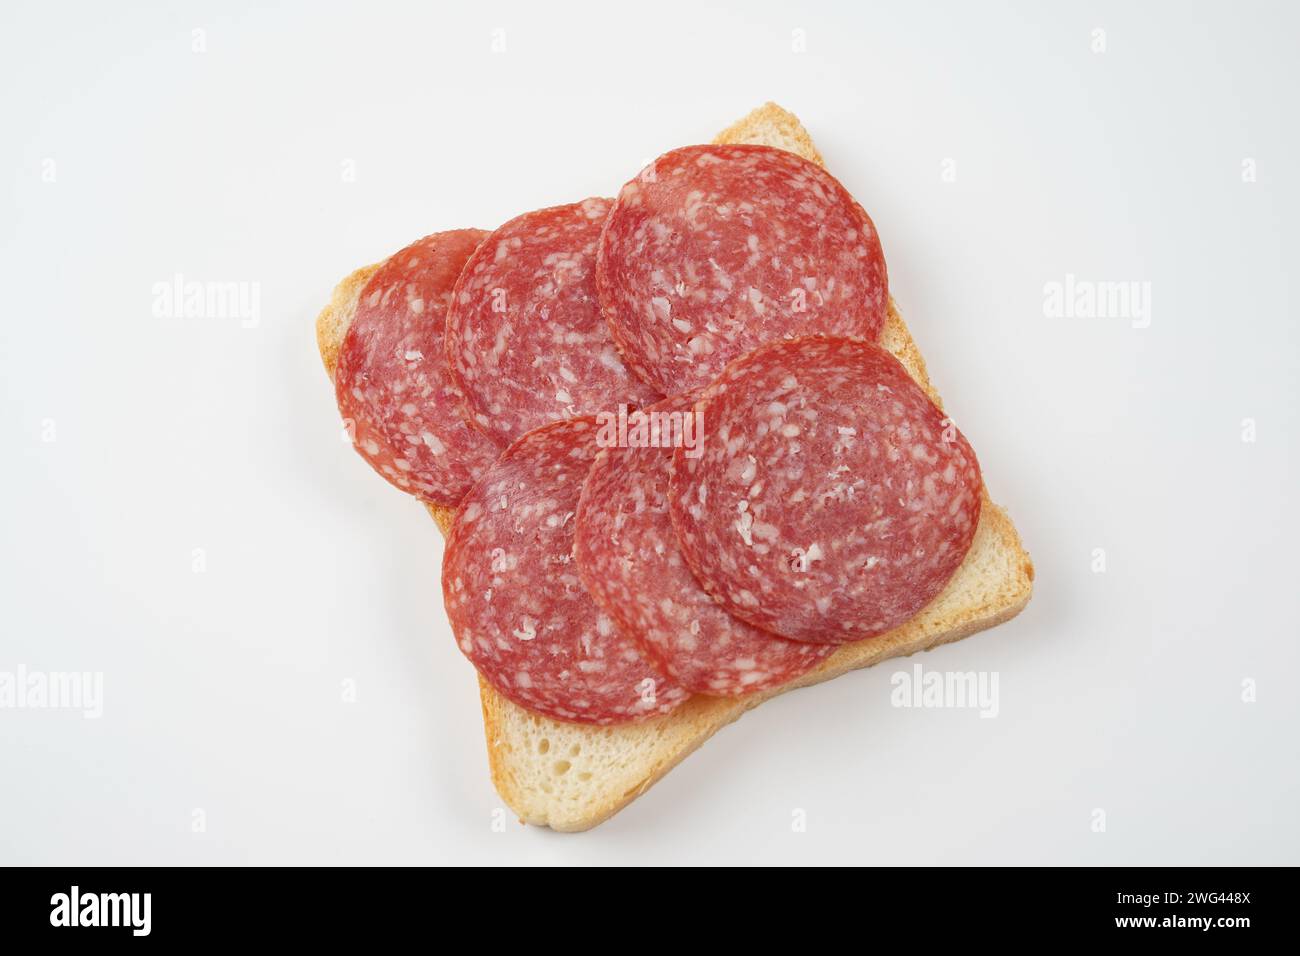 Salami sandwich. Open sandwich of salami slices, thin cut. Spanish salami with spices on  bread. Stock Photo